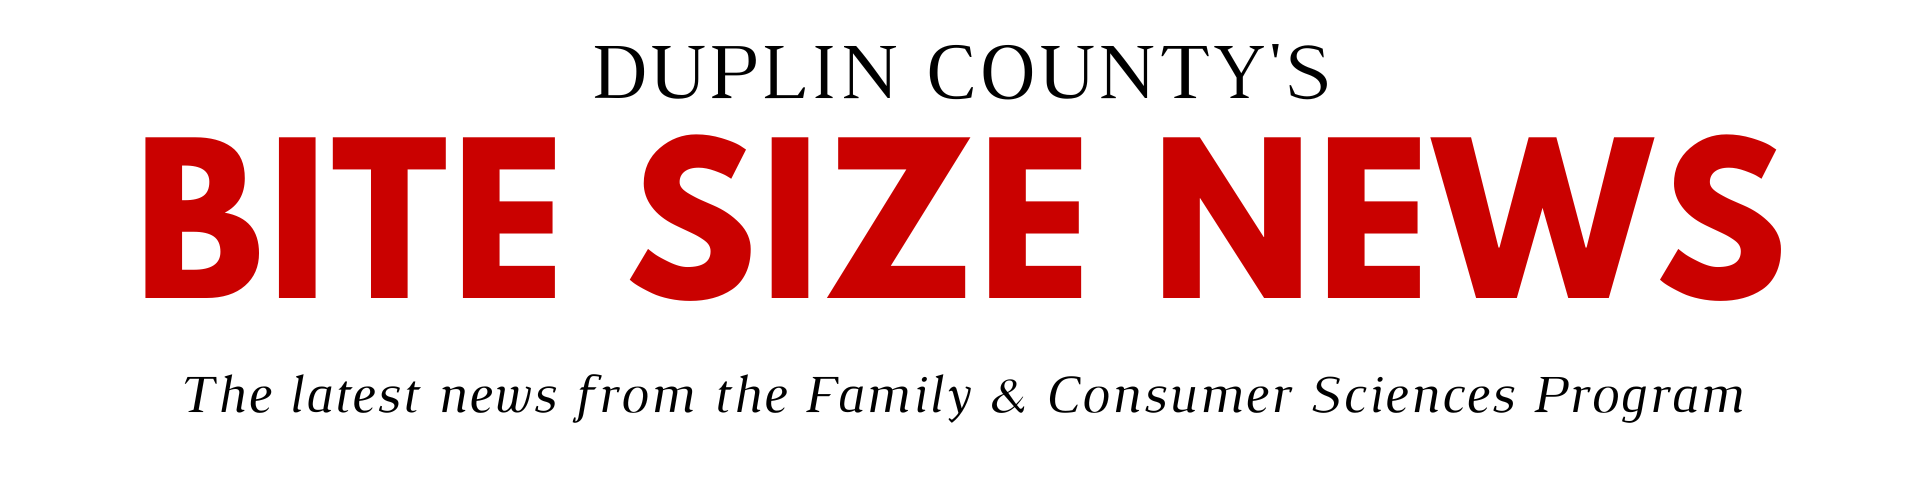 duplin county's bite size news. the latest news from the family and consumer sciences program